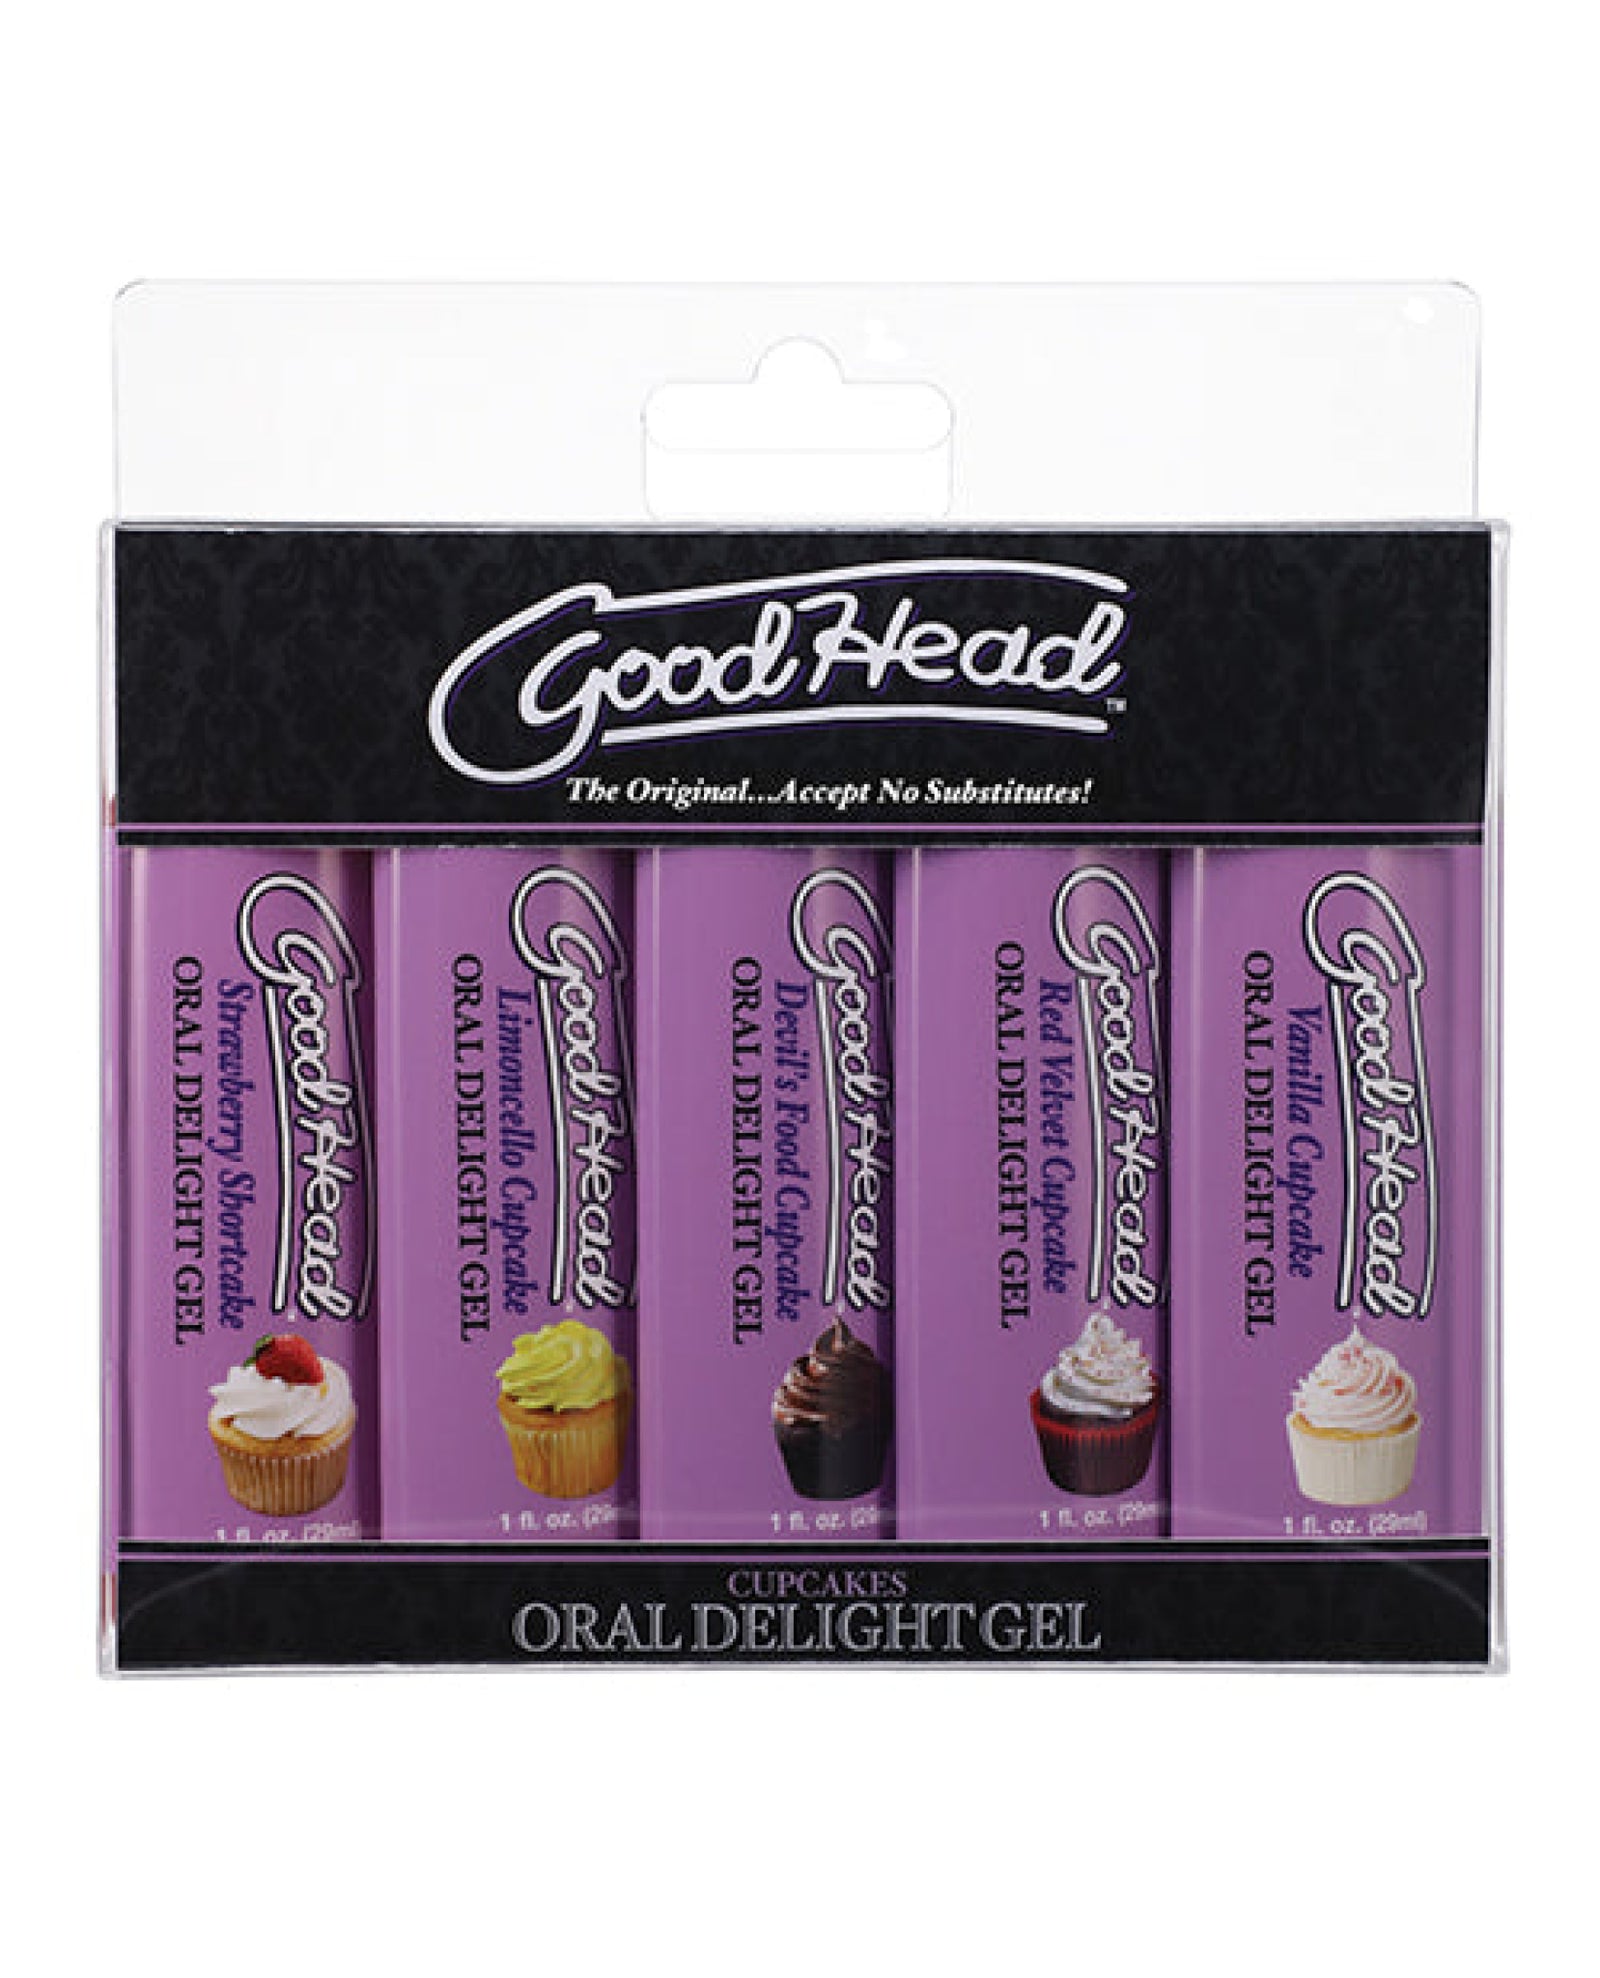 Goodhead Cupcake Oral Delight Gel - Asst. Flavors Pack Of 5 Doc Johnson